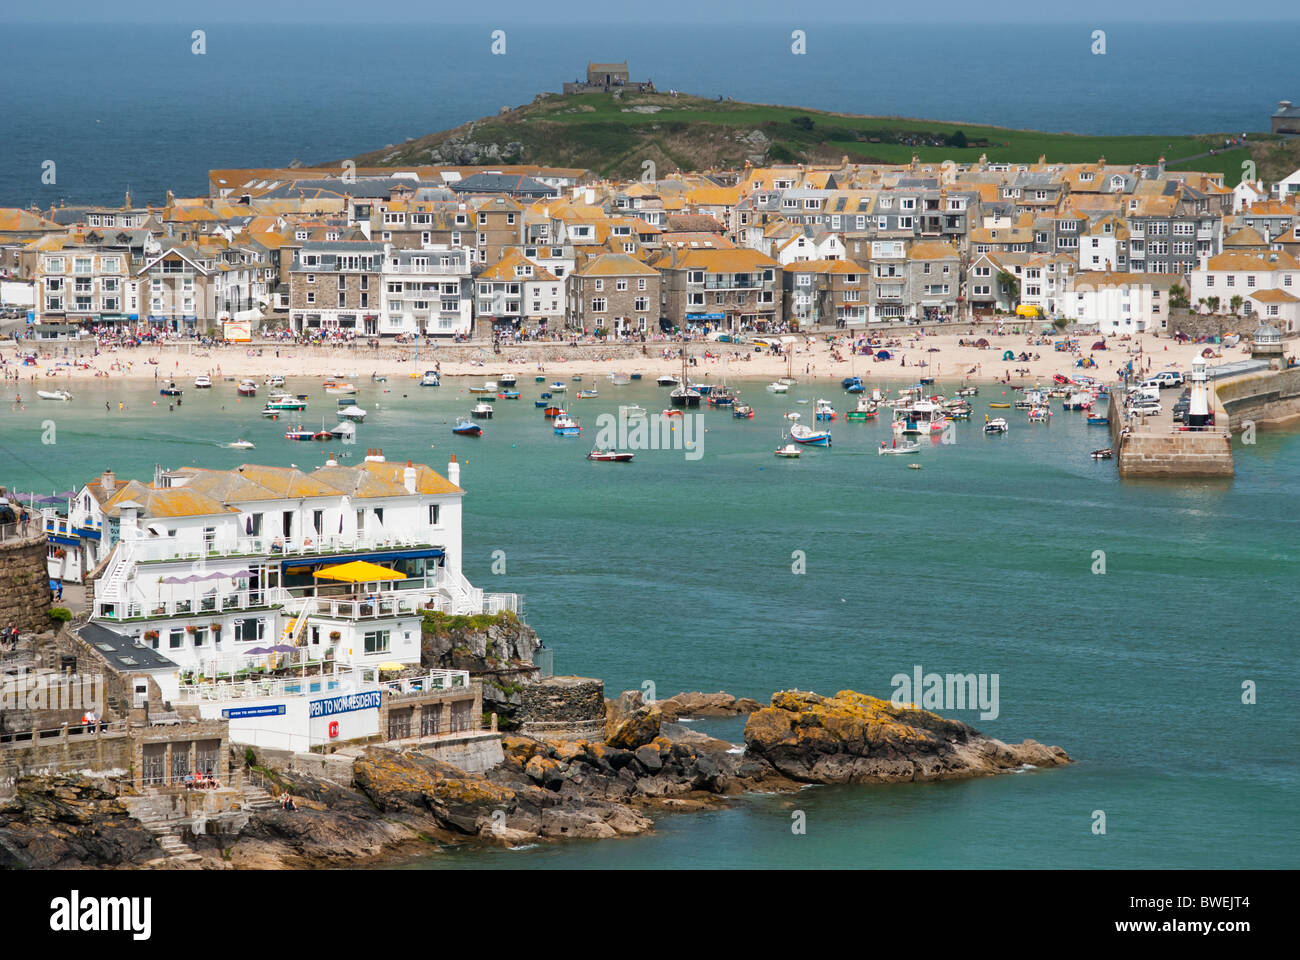 The English seaside town of St Ives in Cornwall, UK. Stock Photo